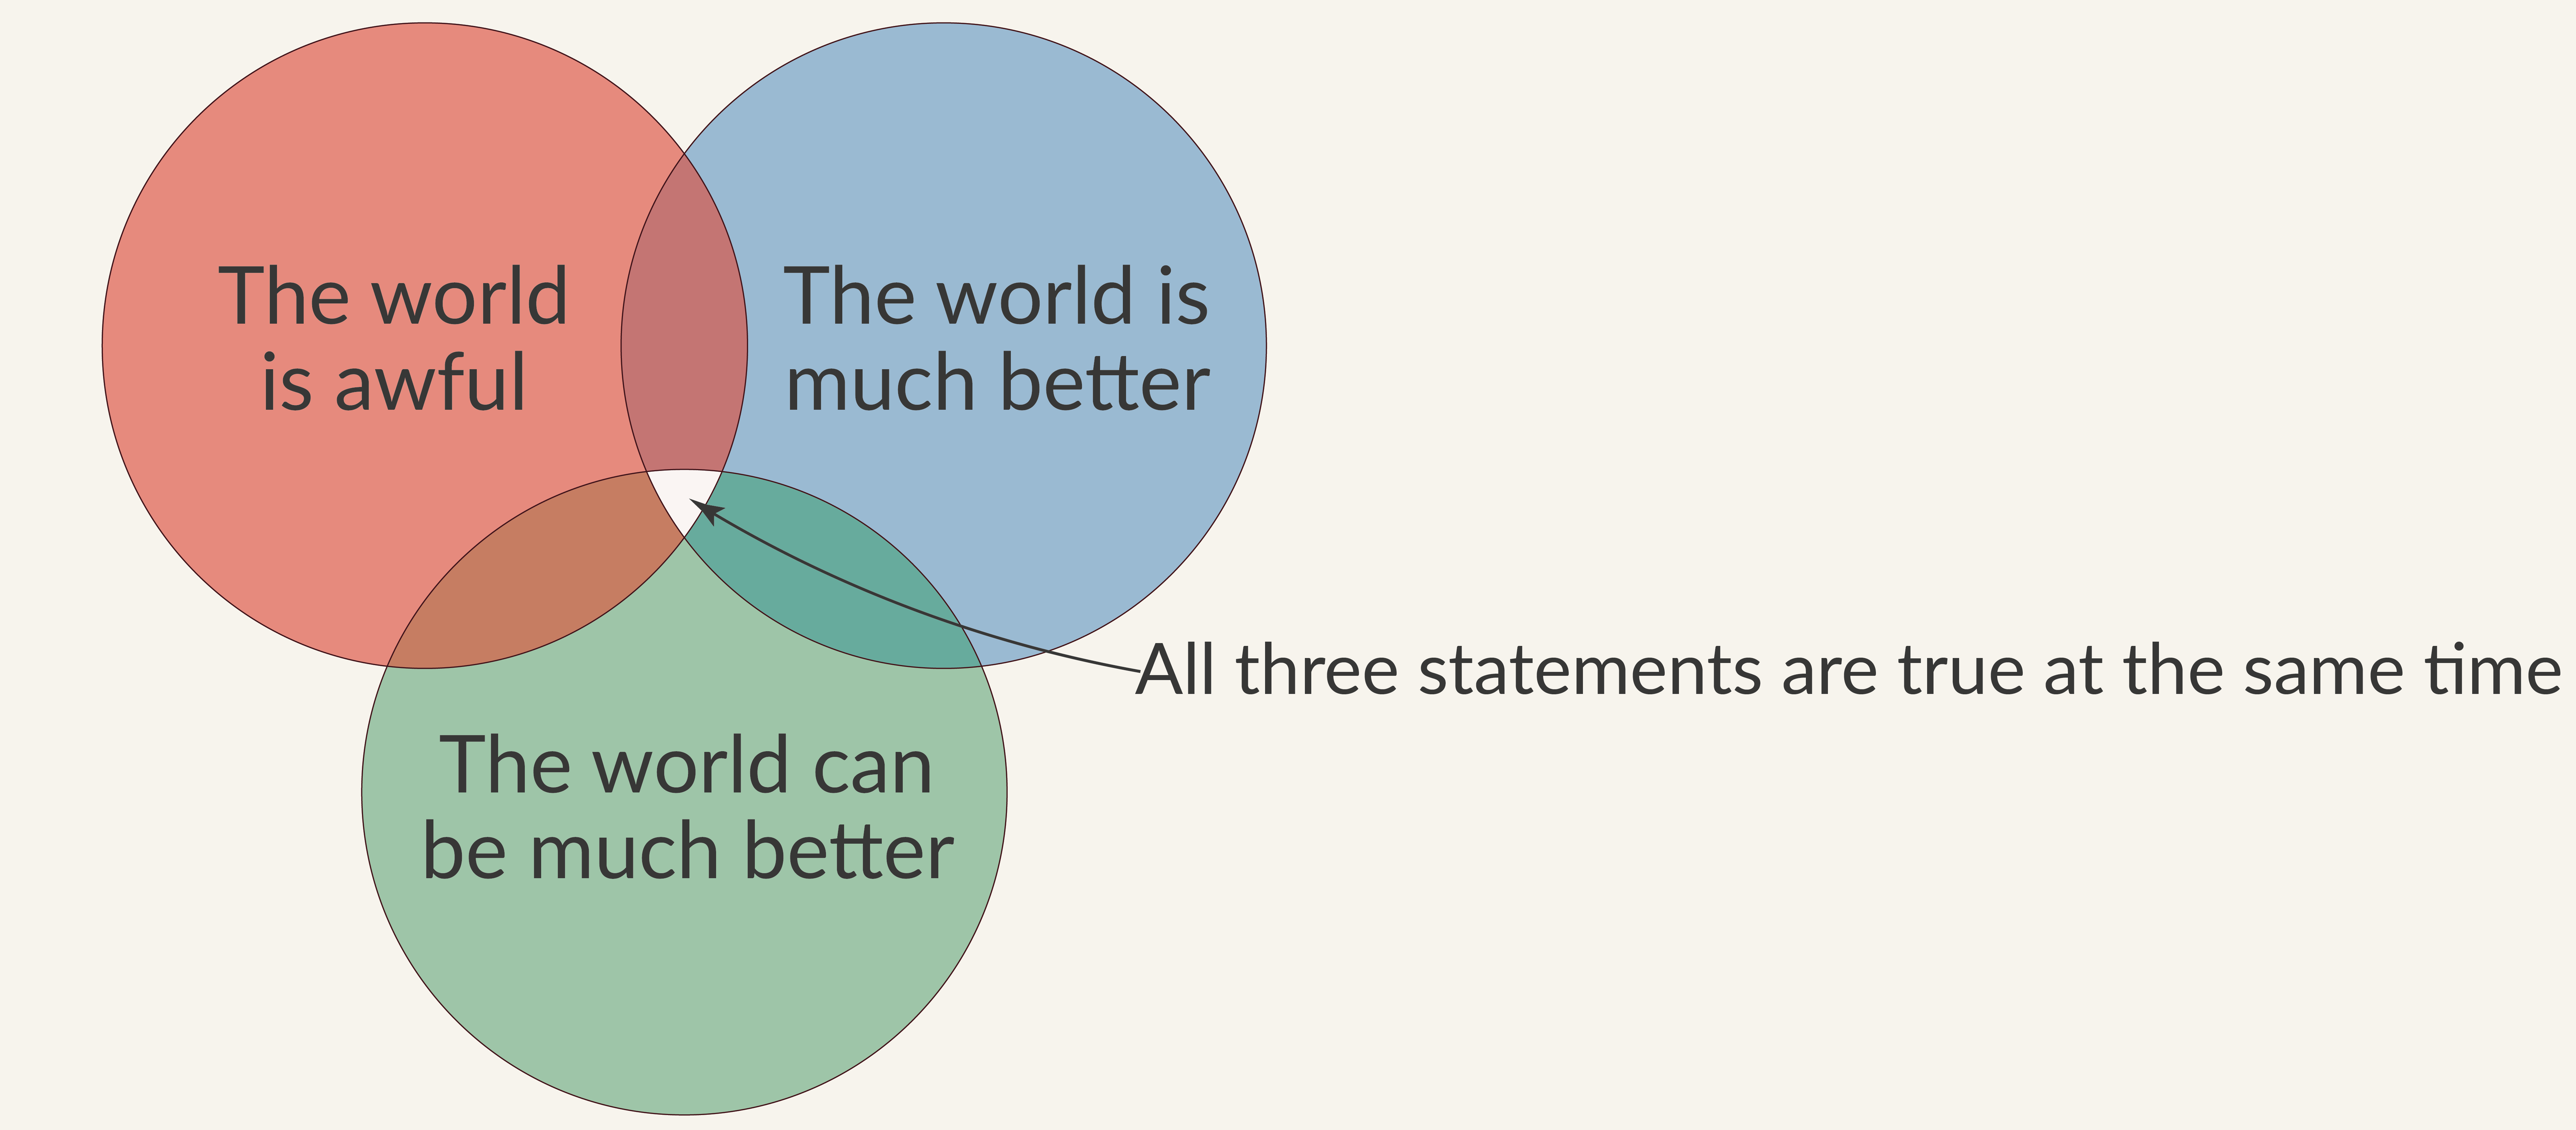 A Venn diagram that shows the three statements and points to their overlapping area, saying ‘All three statements are true at the same time’